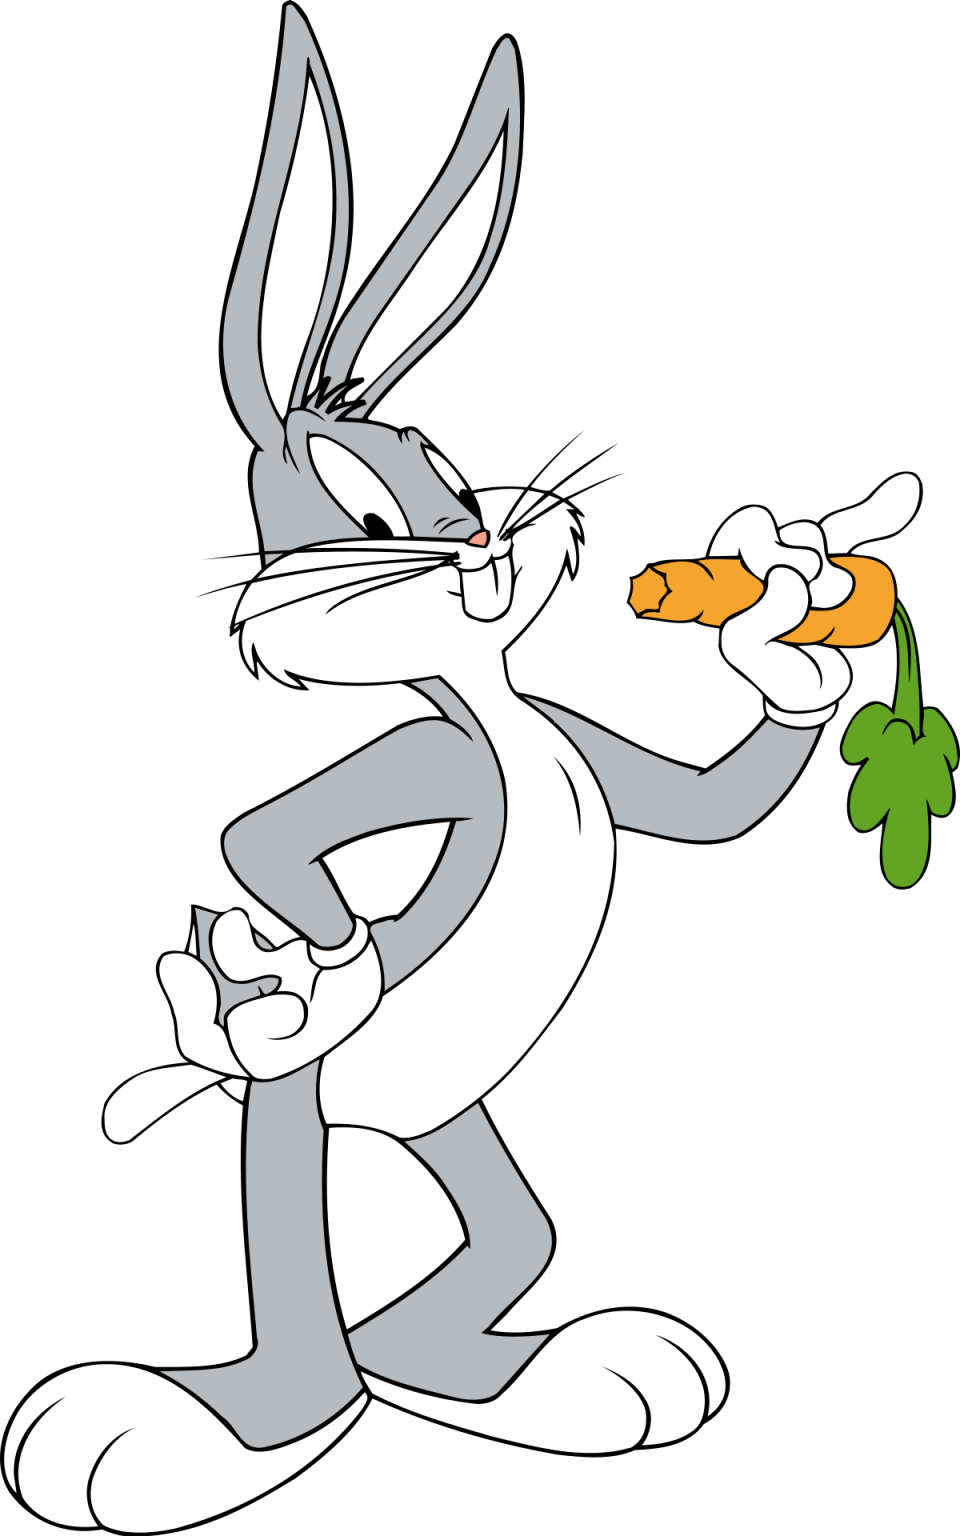 Do you remember the Looney Tunes theme music? The Kentucky Symphony Orchestra will be playing the themes from TV shows and cartoons from the 1950s through 1990s this weekend at Devou Park, Covington, and Tower Park, Fort Thomas.